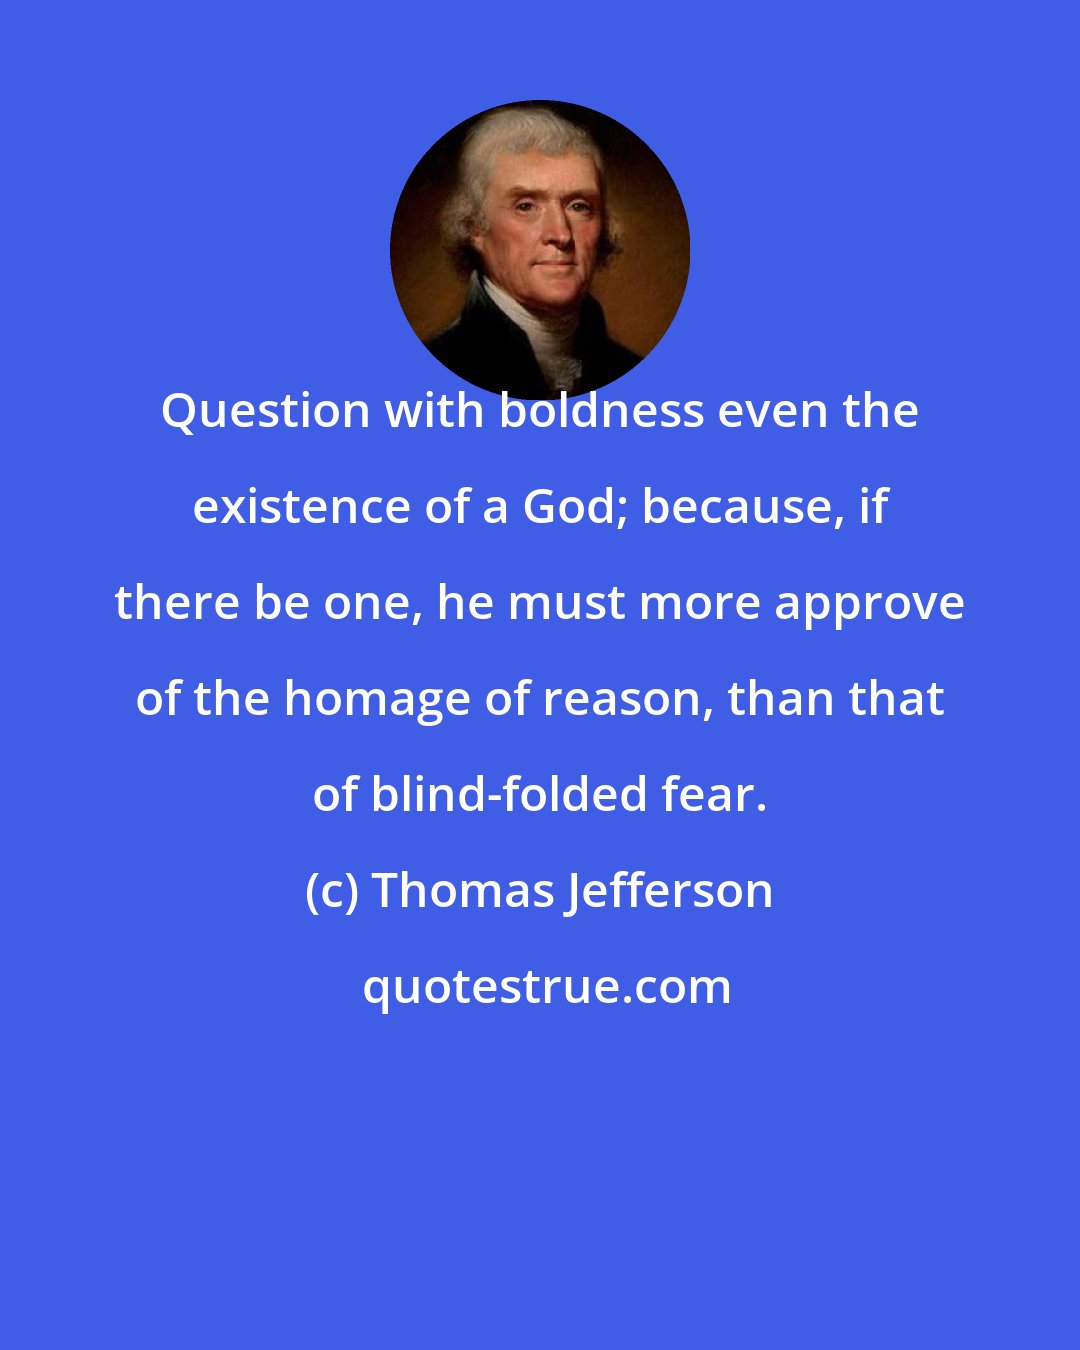 Thomas Jefferson: Question with boldness even the existence of a God; because, if there be one, he must more approve of the homage of reason, than that of blind-folded fear.